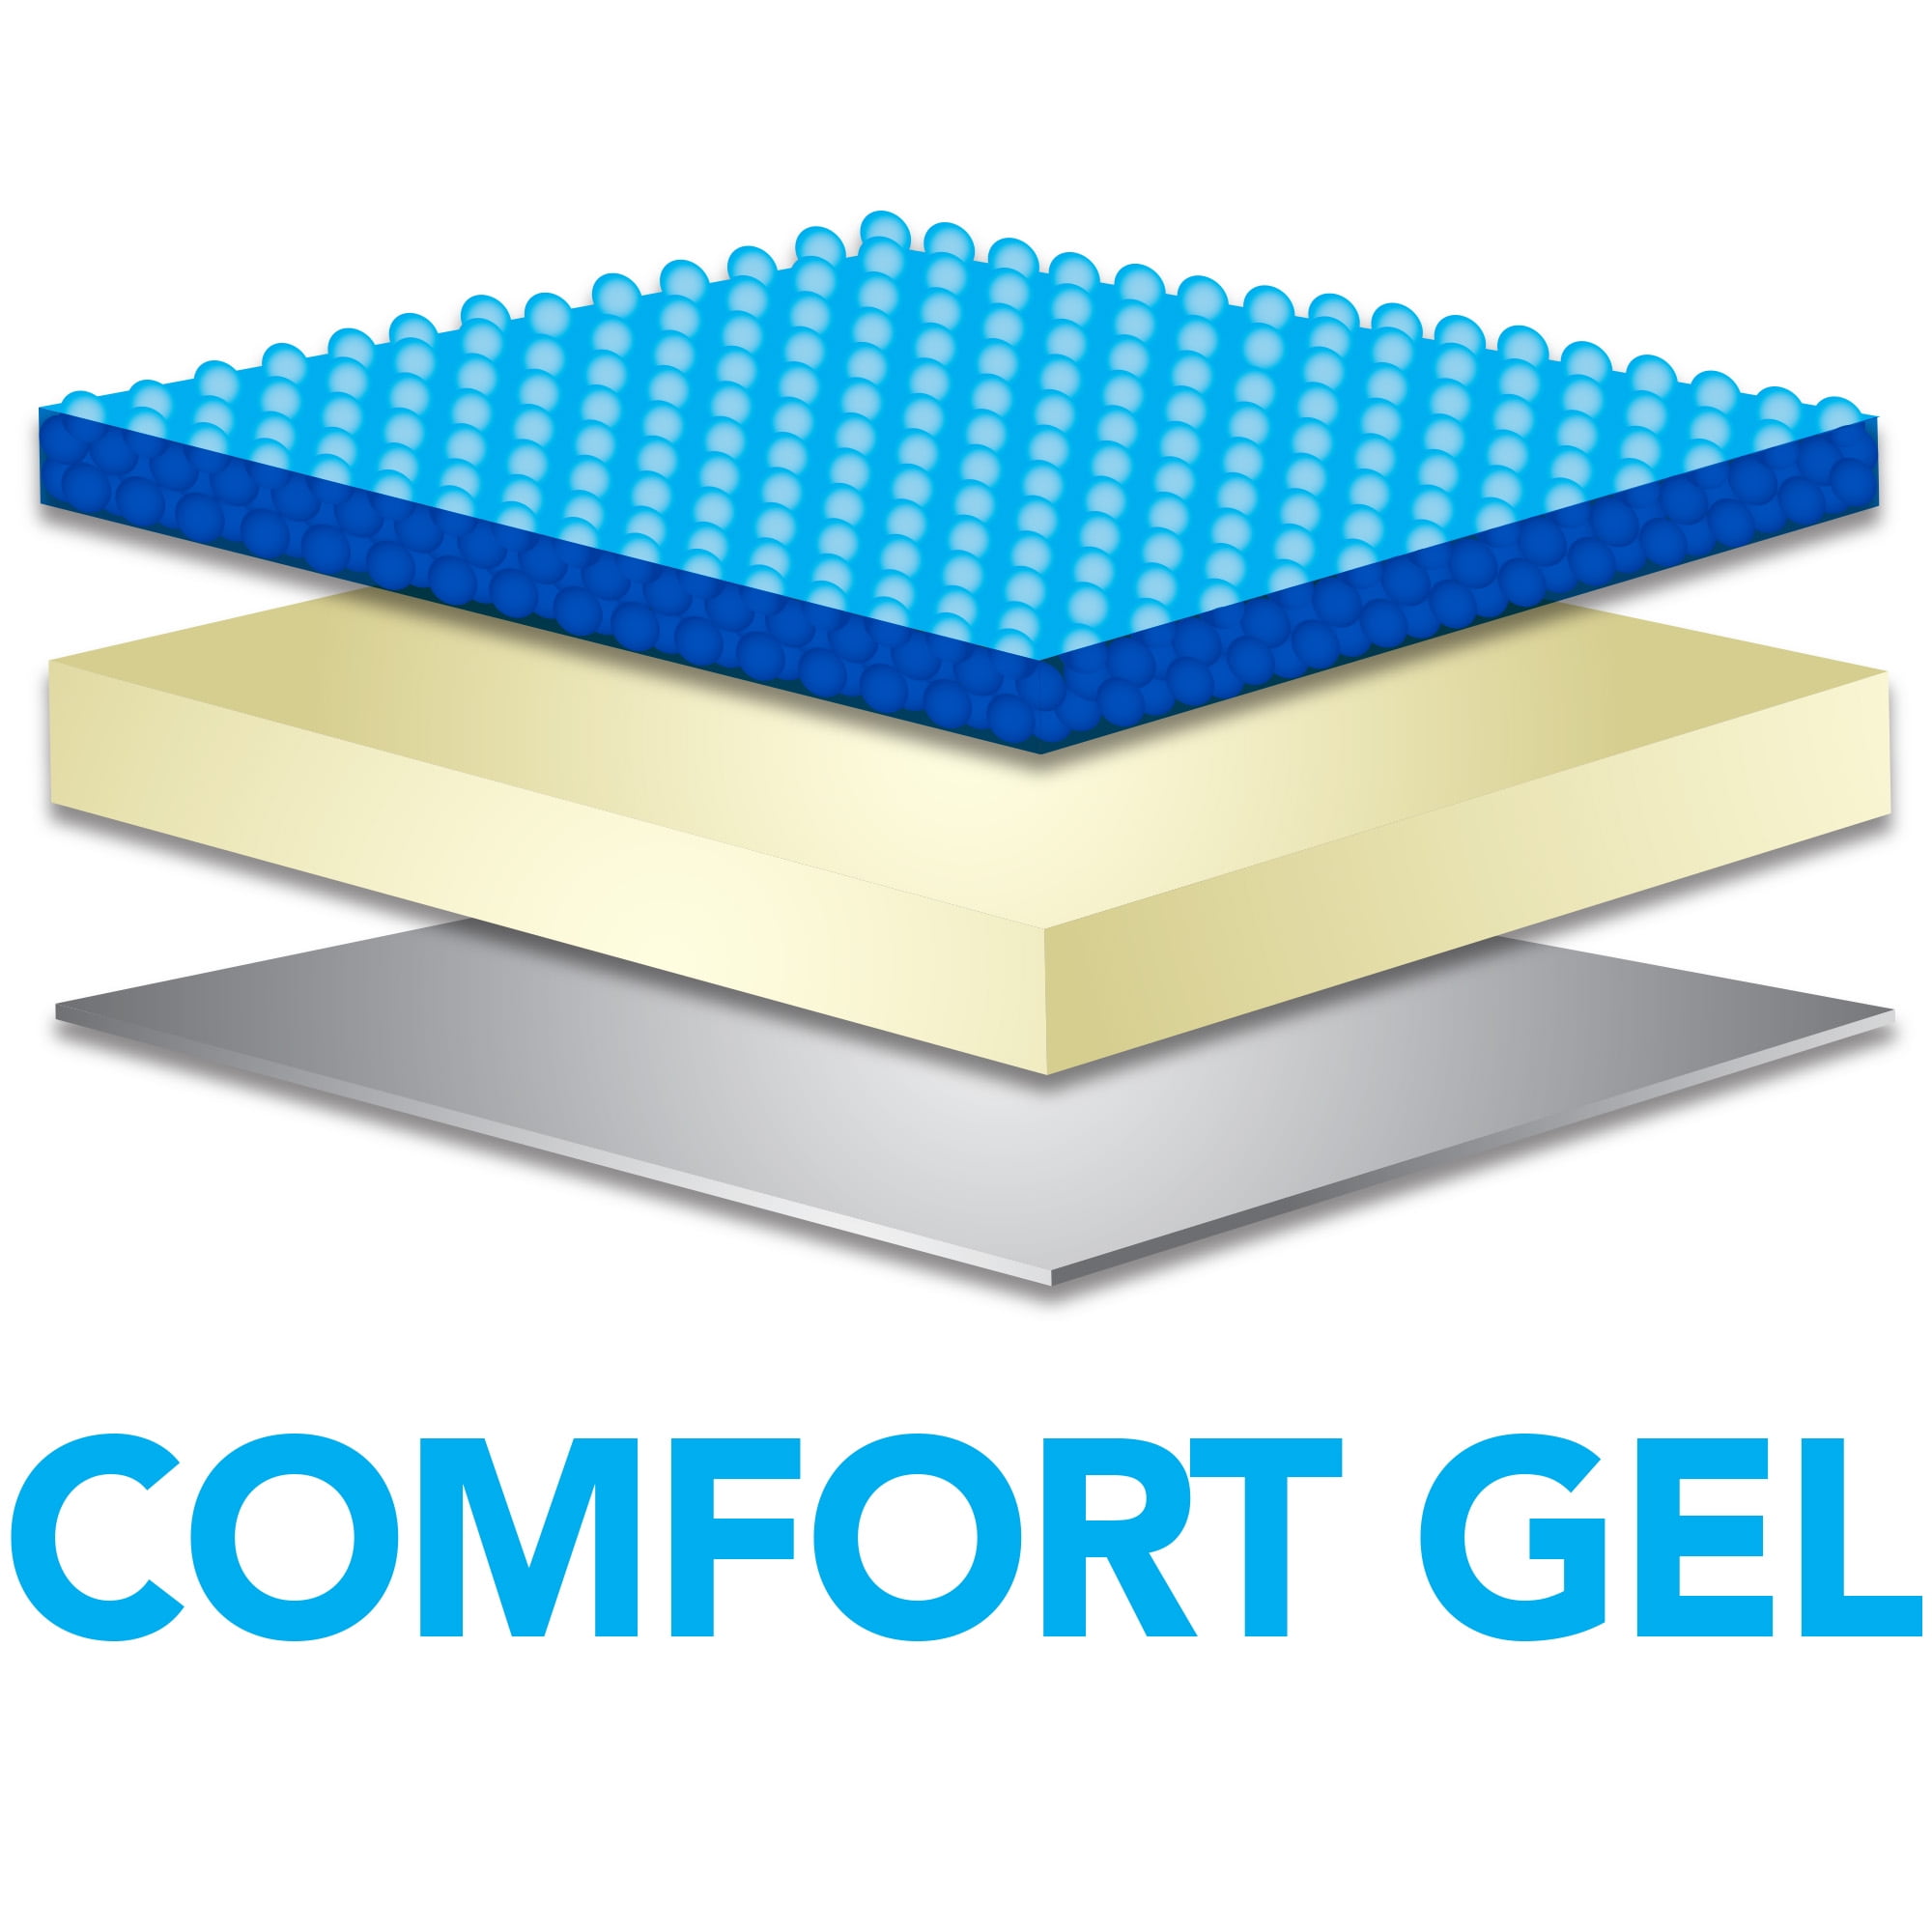 Goodyear GY1238 Seat Cushion with Gel for Car or Office Chair, High Grade  Memory Foam, Non-Slip Bottom